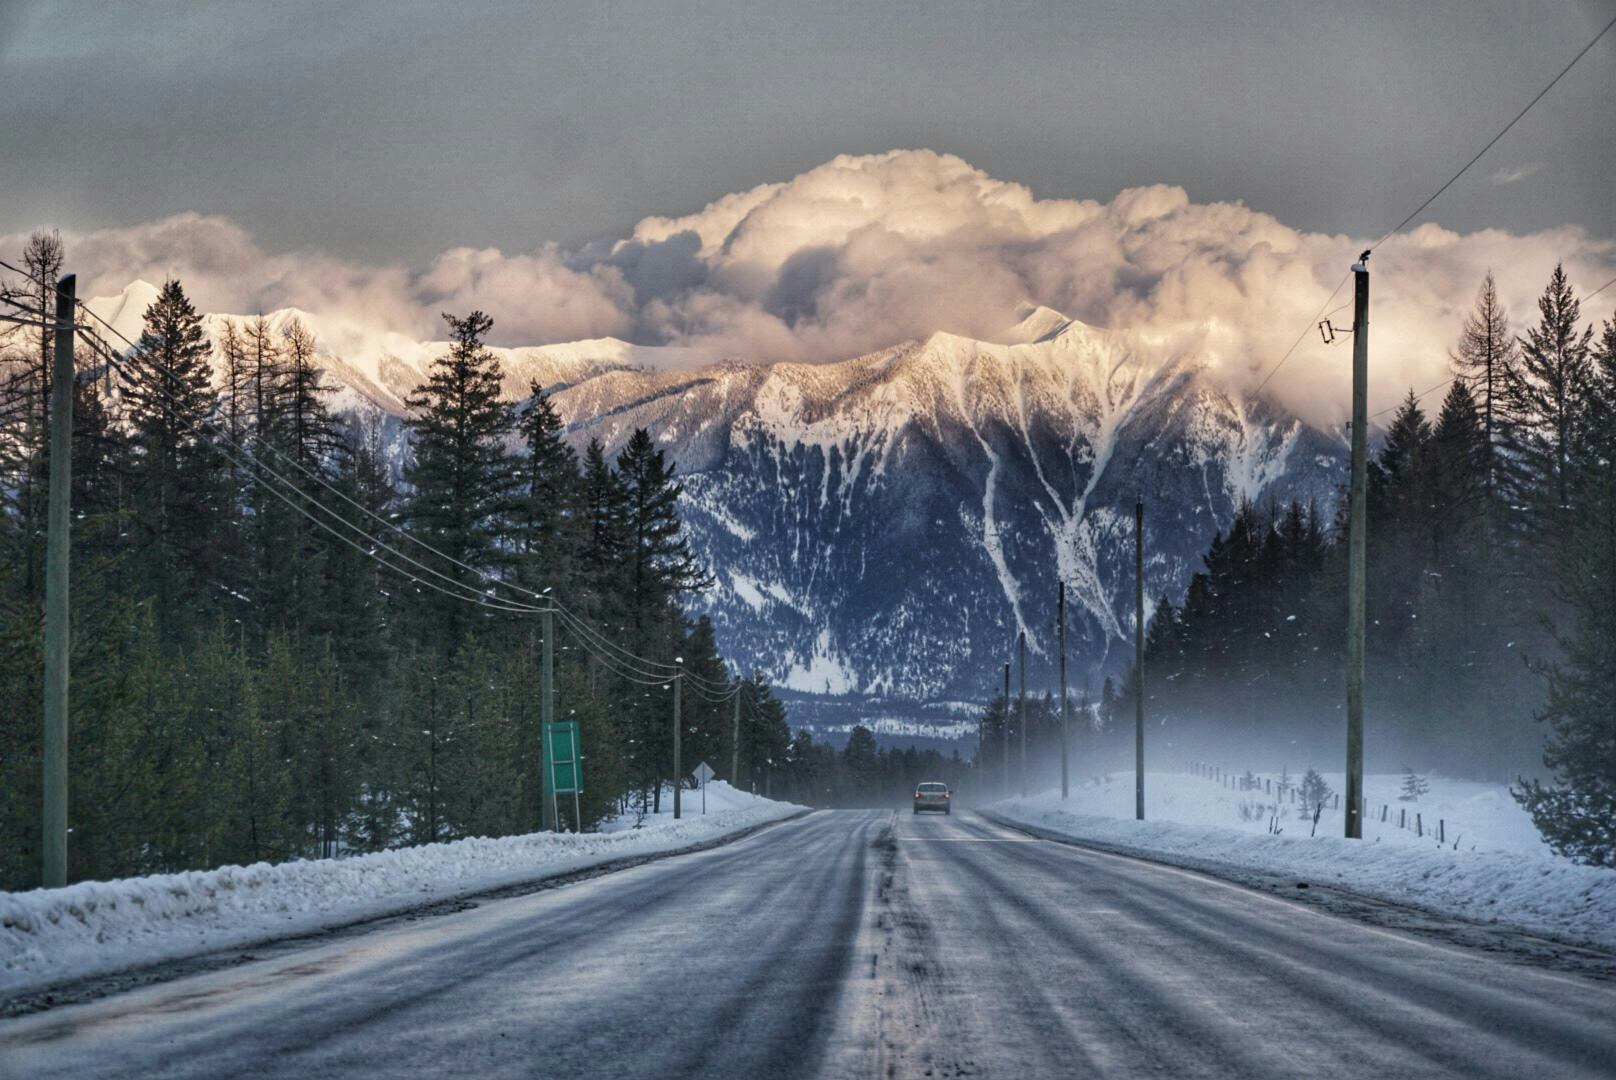 A vehicle is in the middle distance, driving along a snowy road lined with tall pine trees. Snow-laden, forested mountains are straight ahead, and huge clouds linger on top of them, under a grey sky.